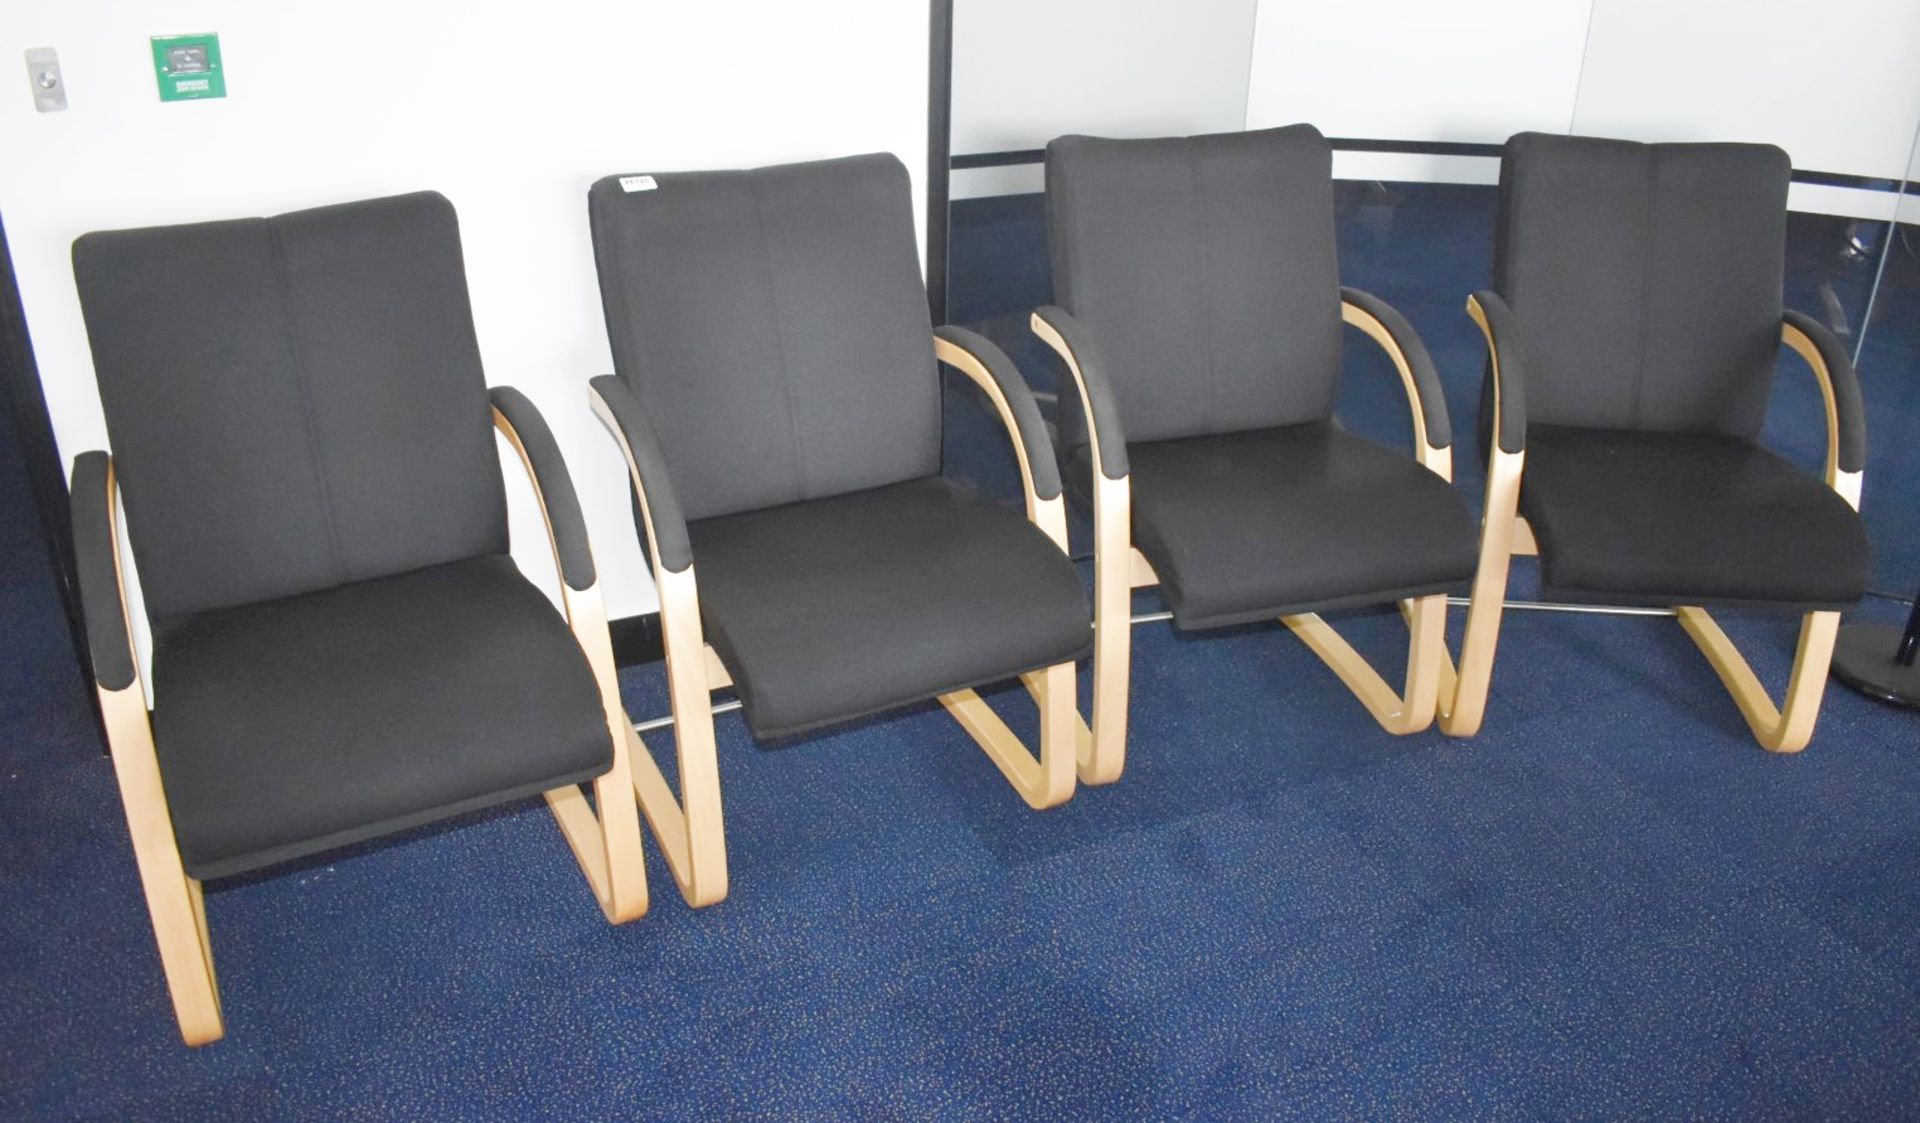 4 x Cantilever Office Meeting Chairs With Bentwood Frames and Black Fabric Seats -Â Manufactured